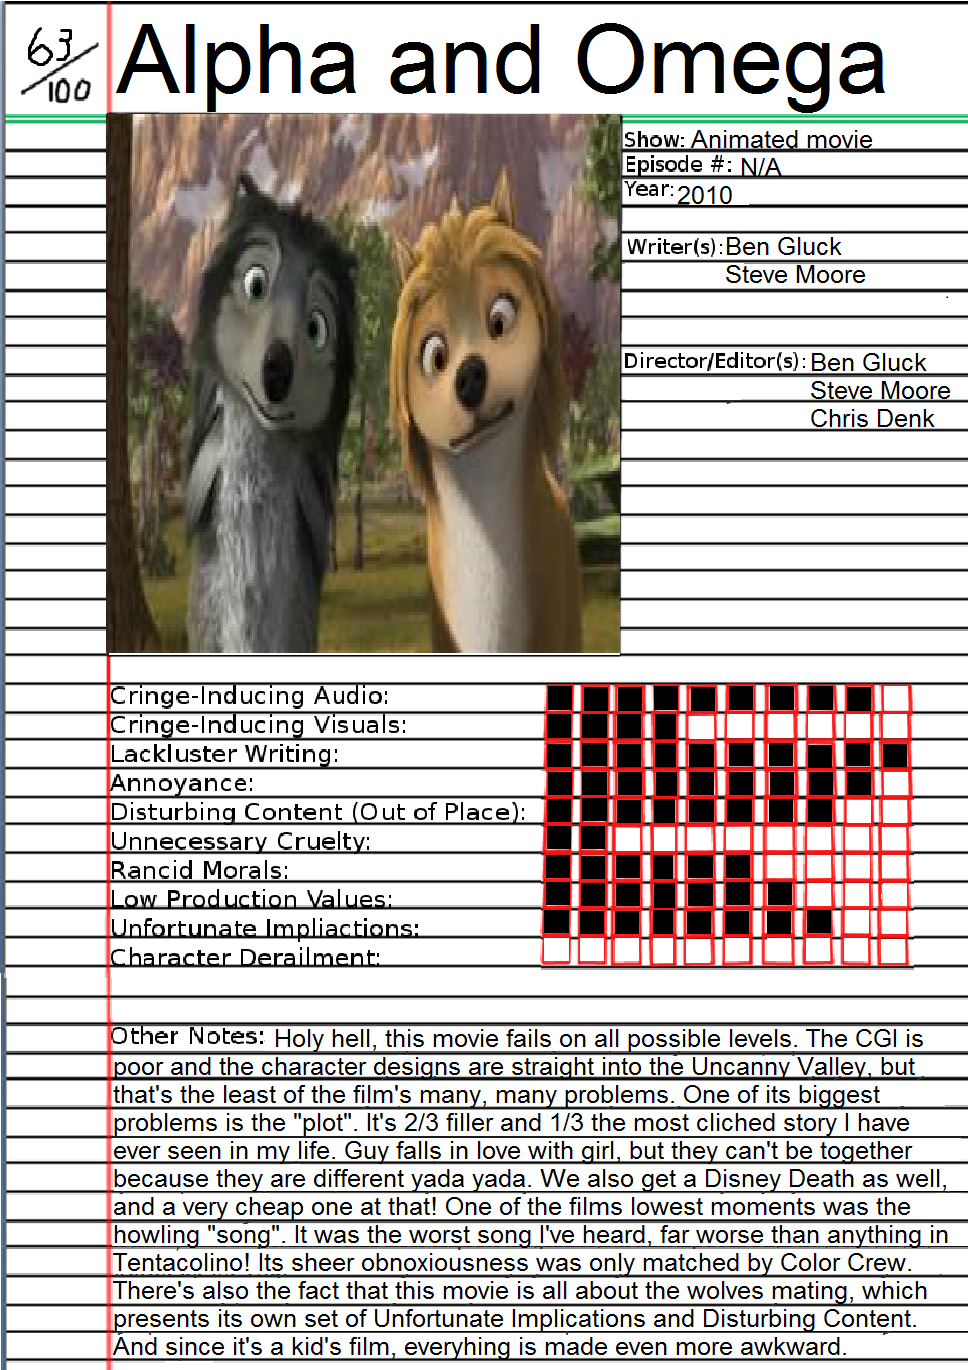 Animated Atrocities - Alpha and Omega by MinerMark on DeviantArt